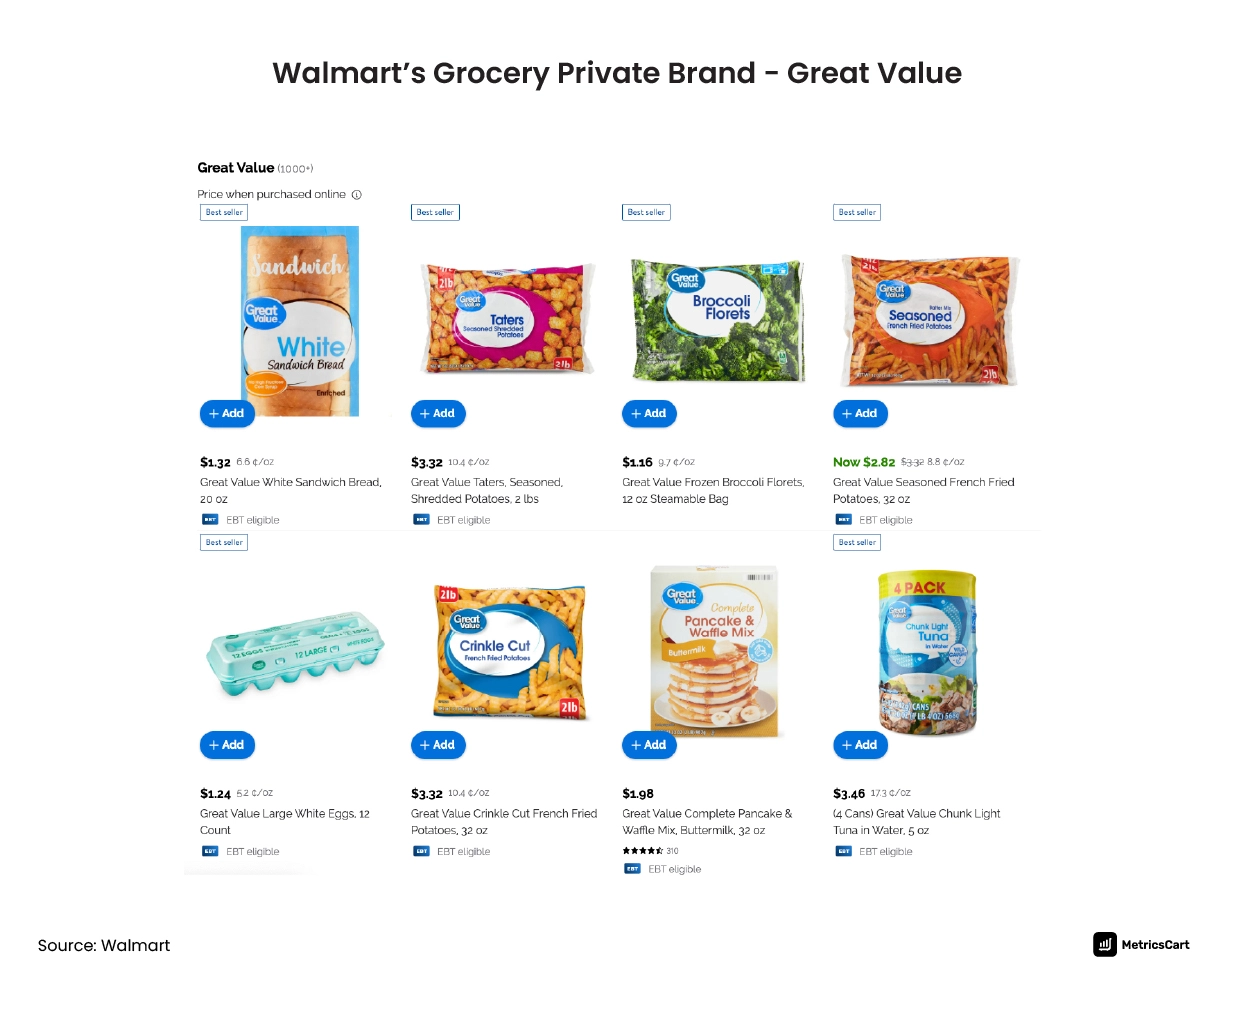 Walmart’s Grocery Private Label Brand - Great Value